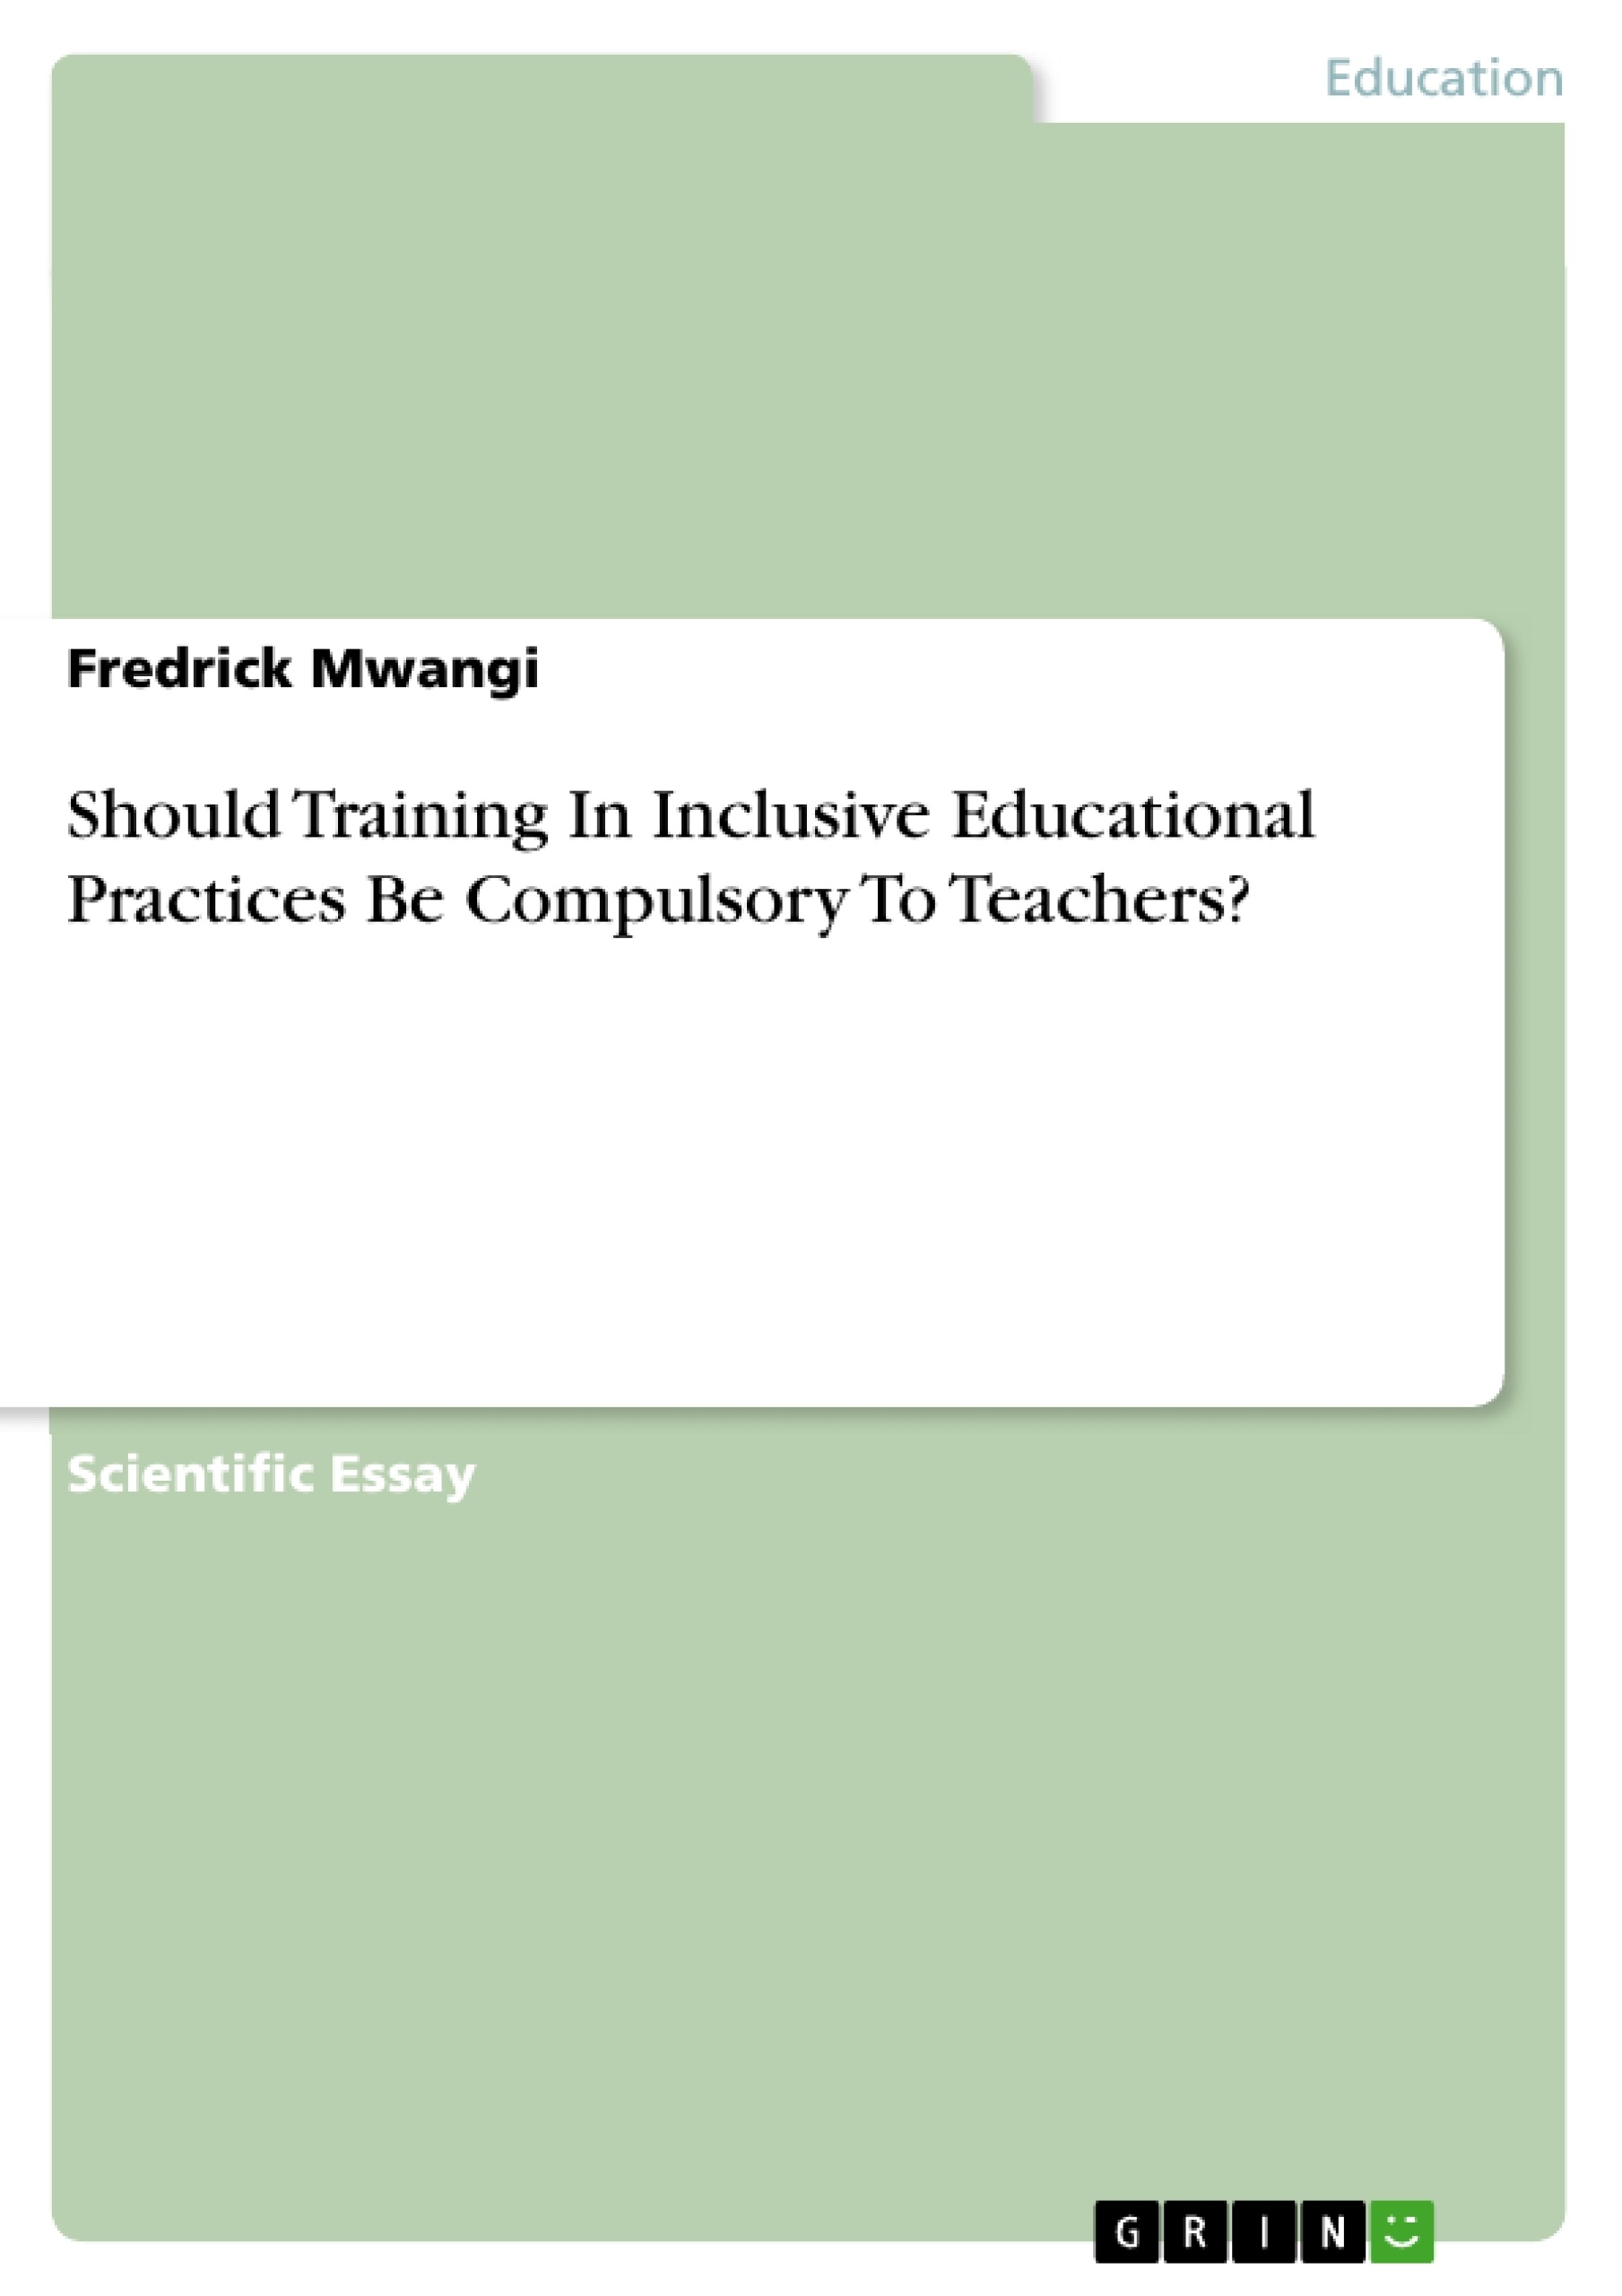 Título: Should Training In Inclusive Educational Practices Be Compulsory To Teachers?